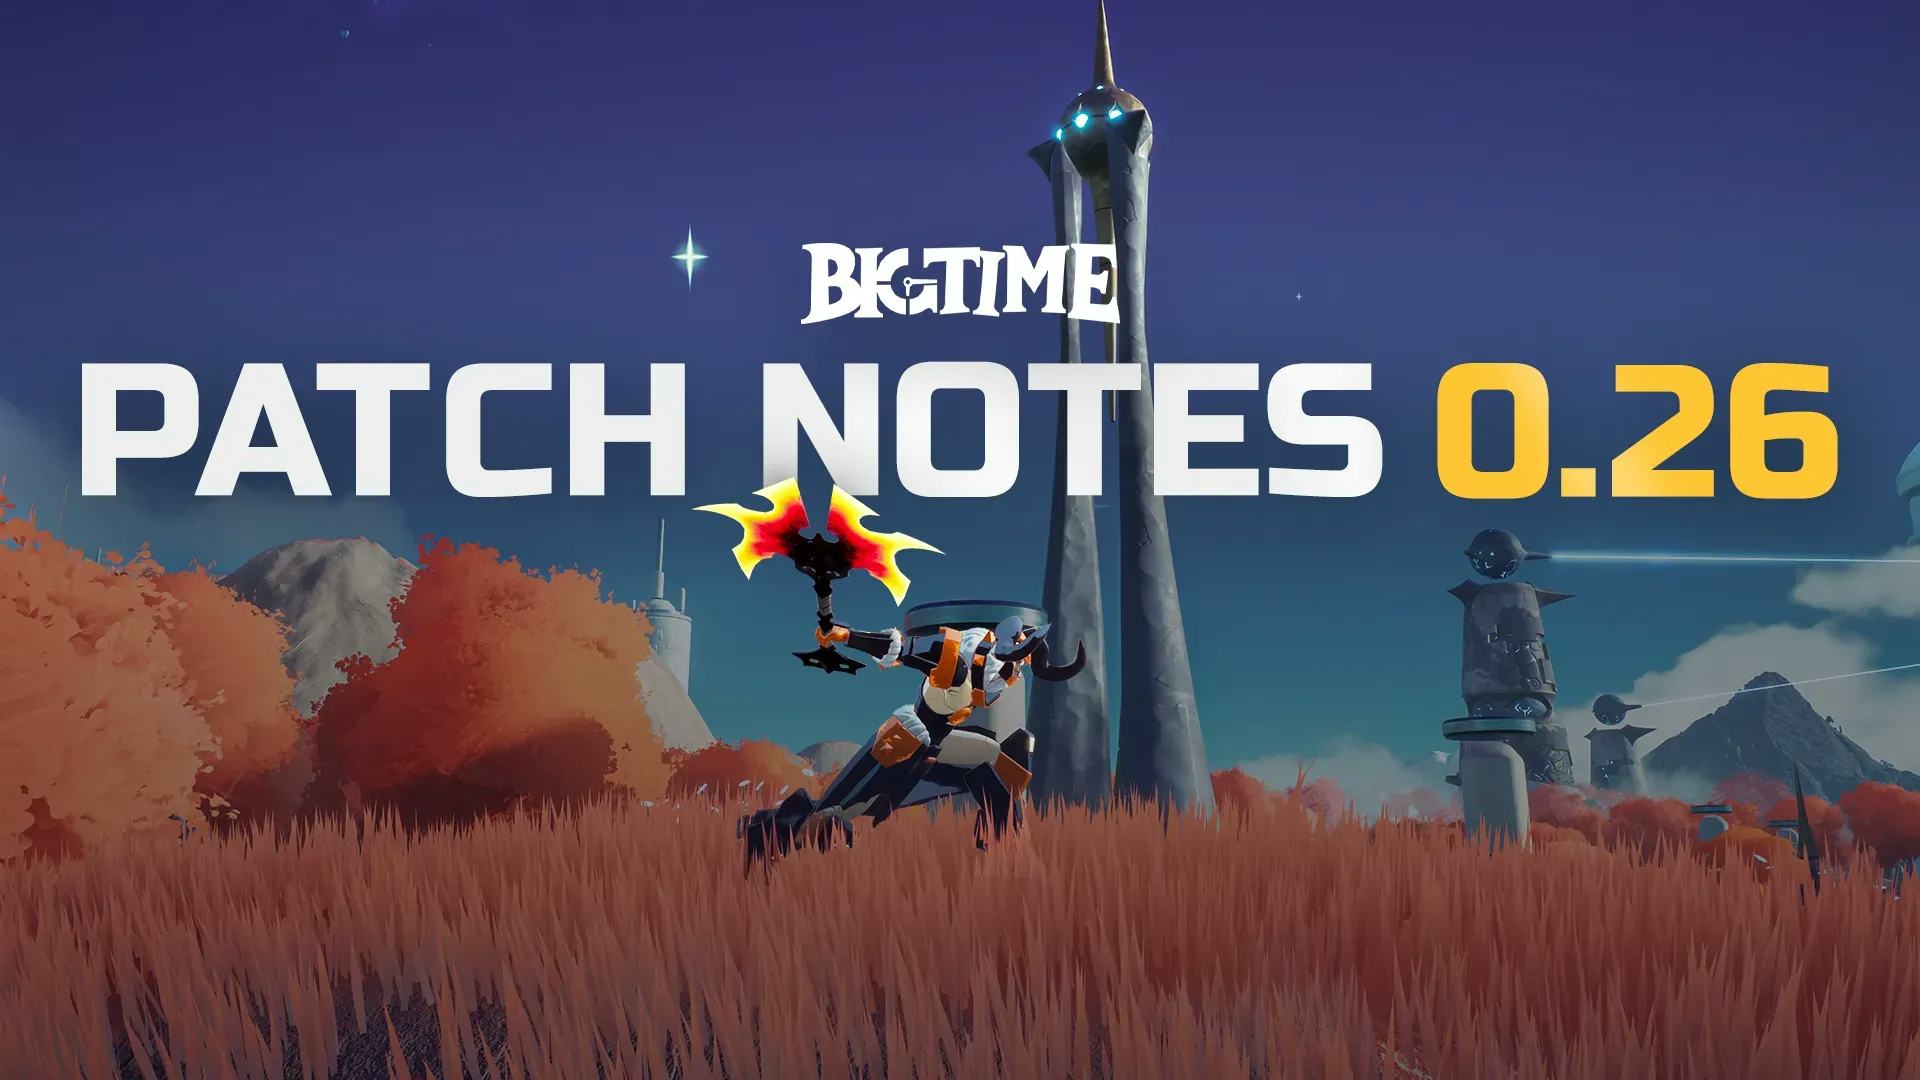 Big Time Update 0.26 Introduces New Classes, New Map, and New Abilities